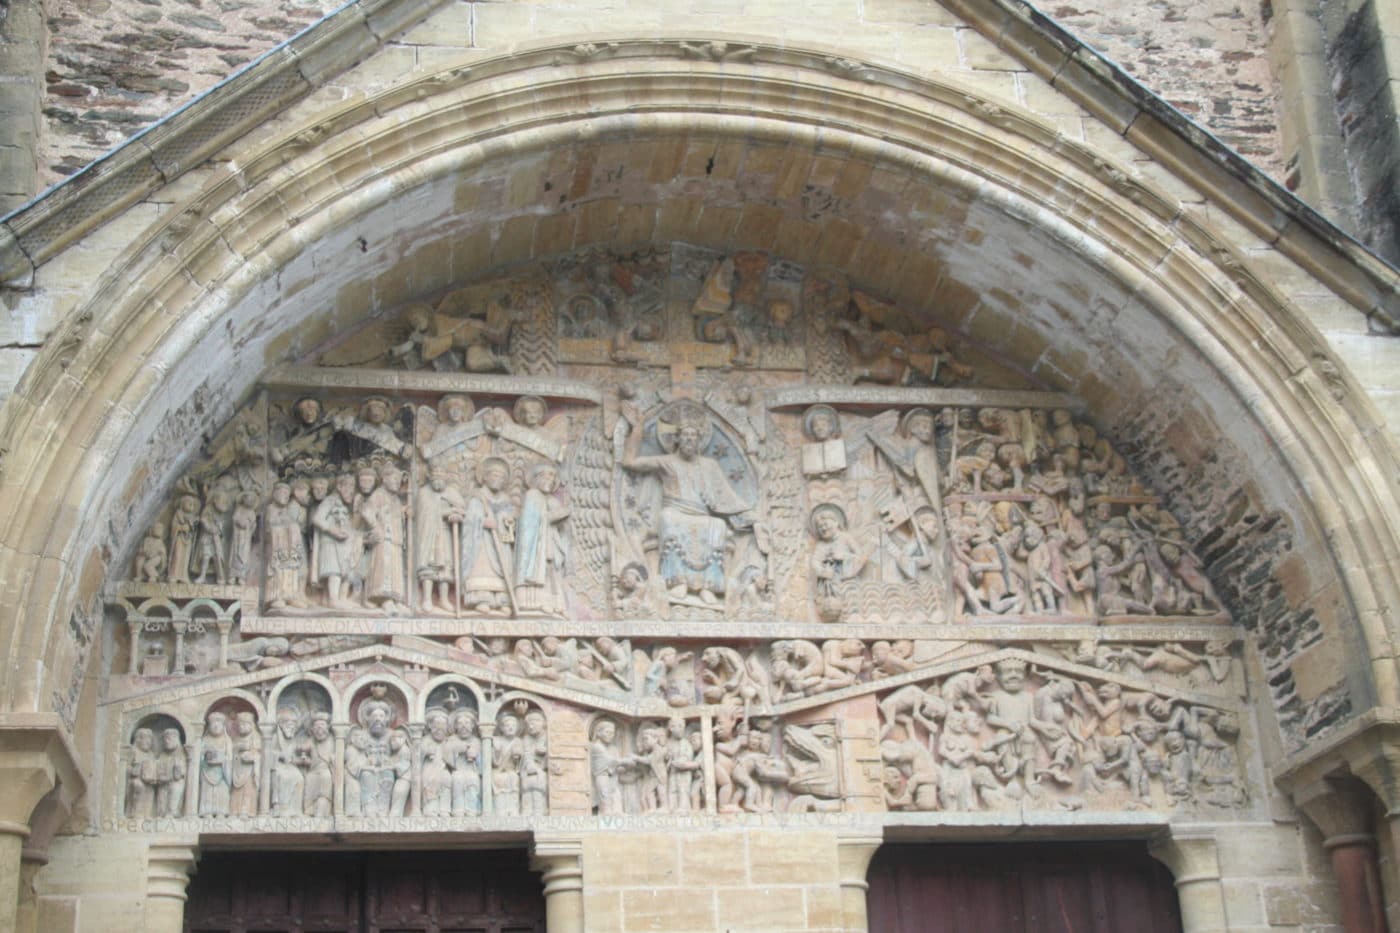 Tympanum from the Abbey Church of Sainte-Foy, Conques, France